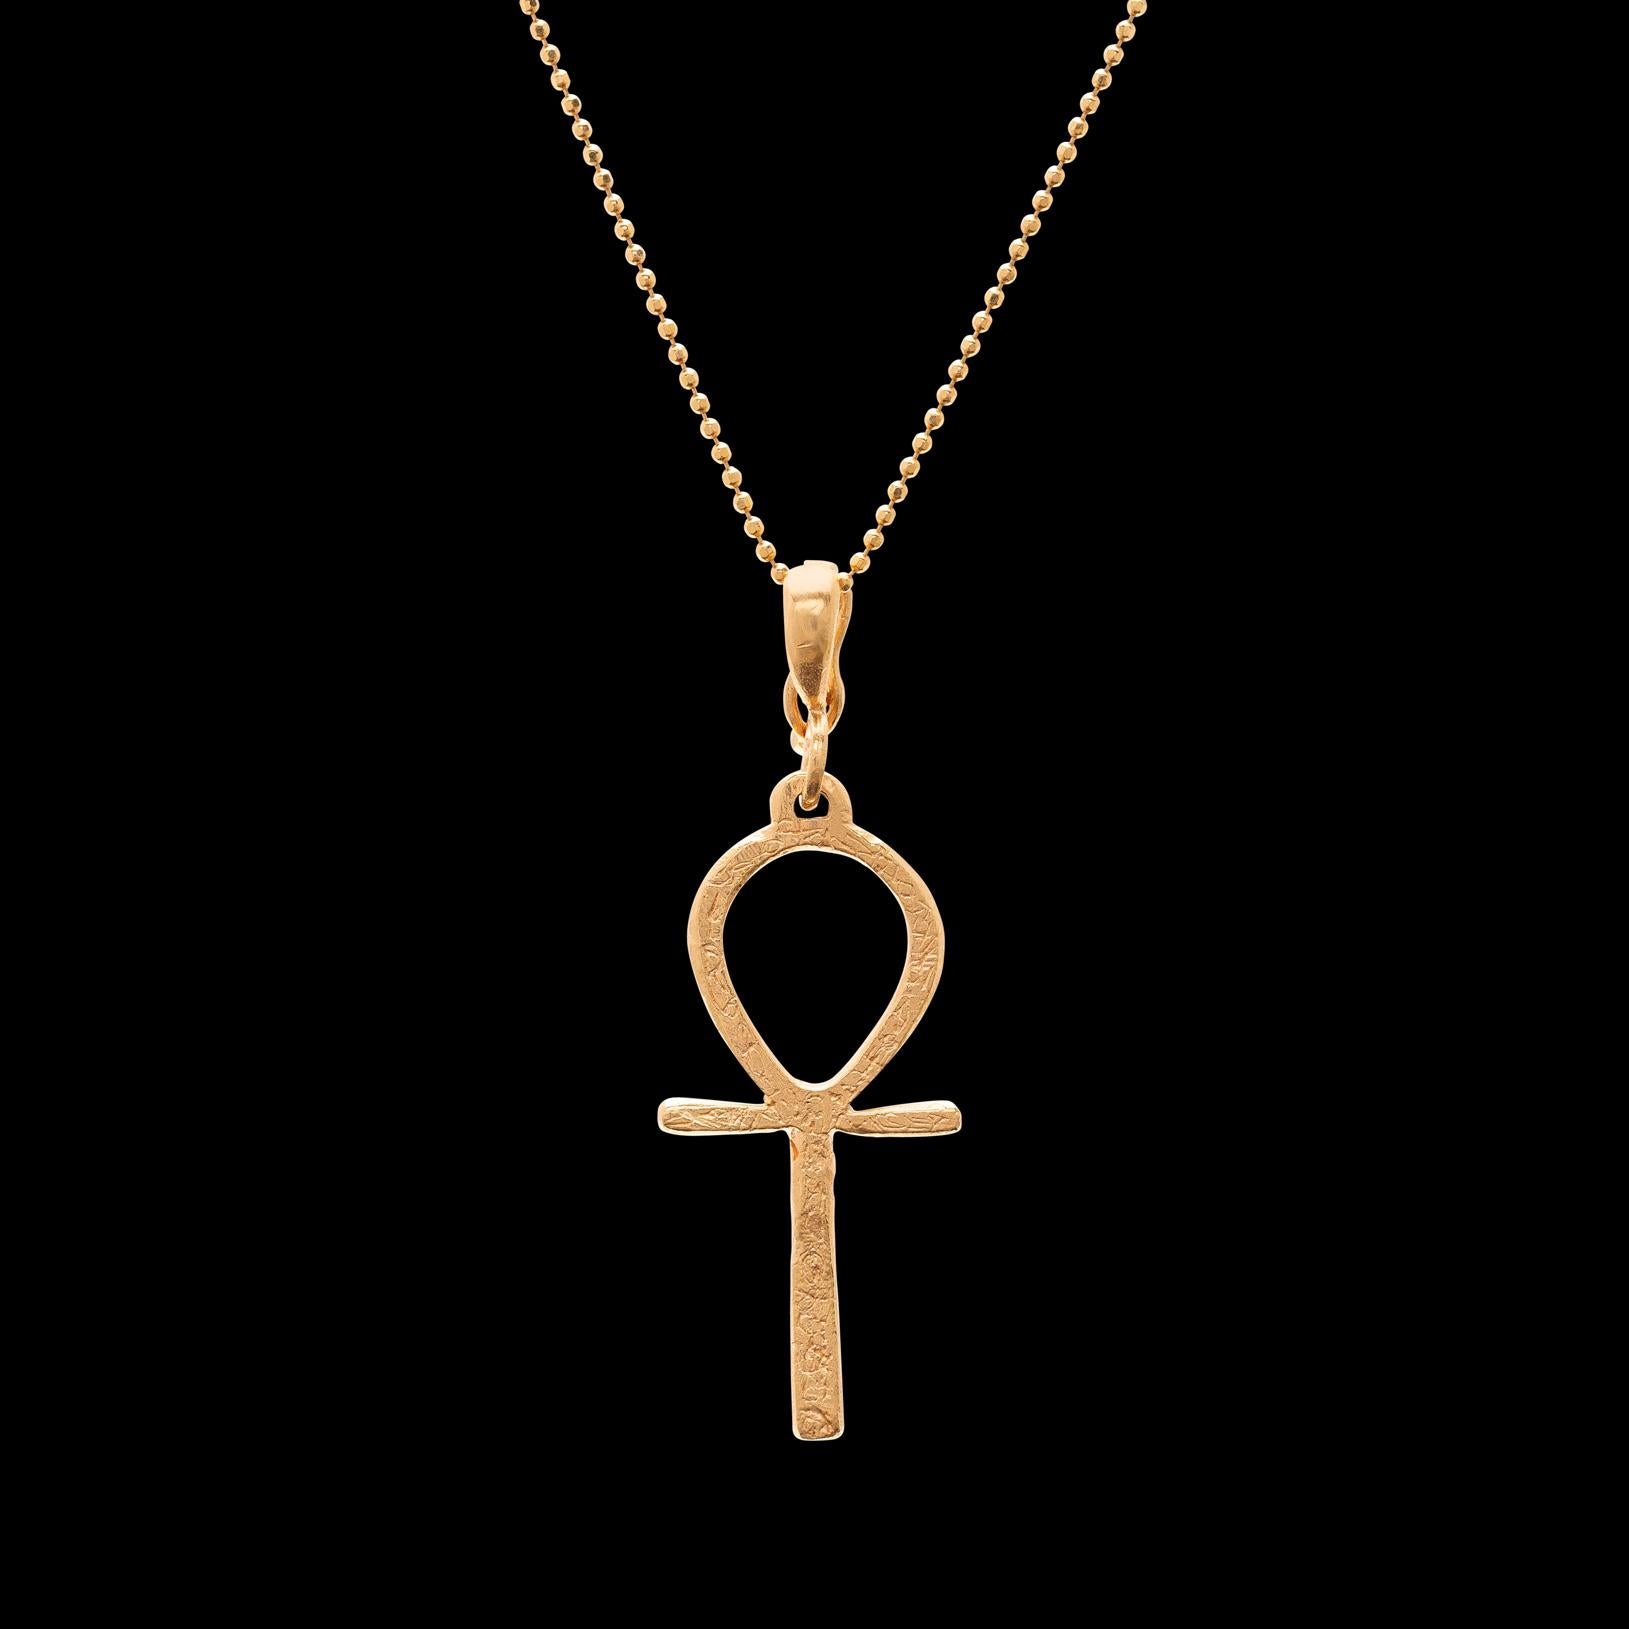 Egyptian Revival Dominique Cohen Boho Ankh Key of Life Pendant and Chain